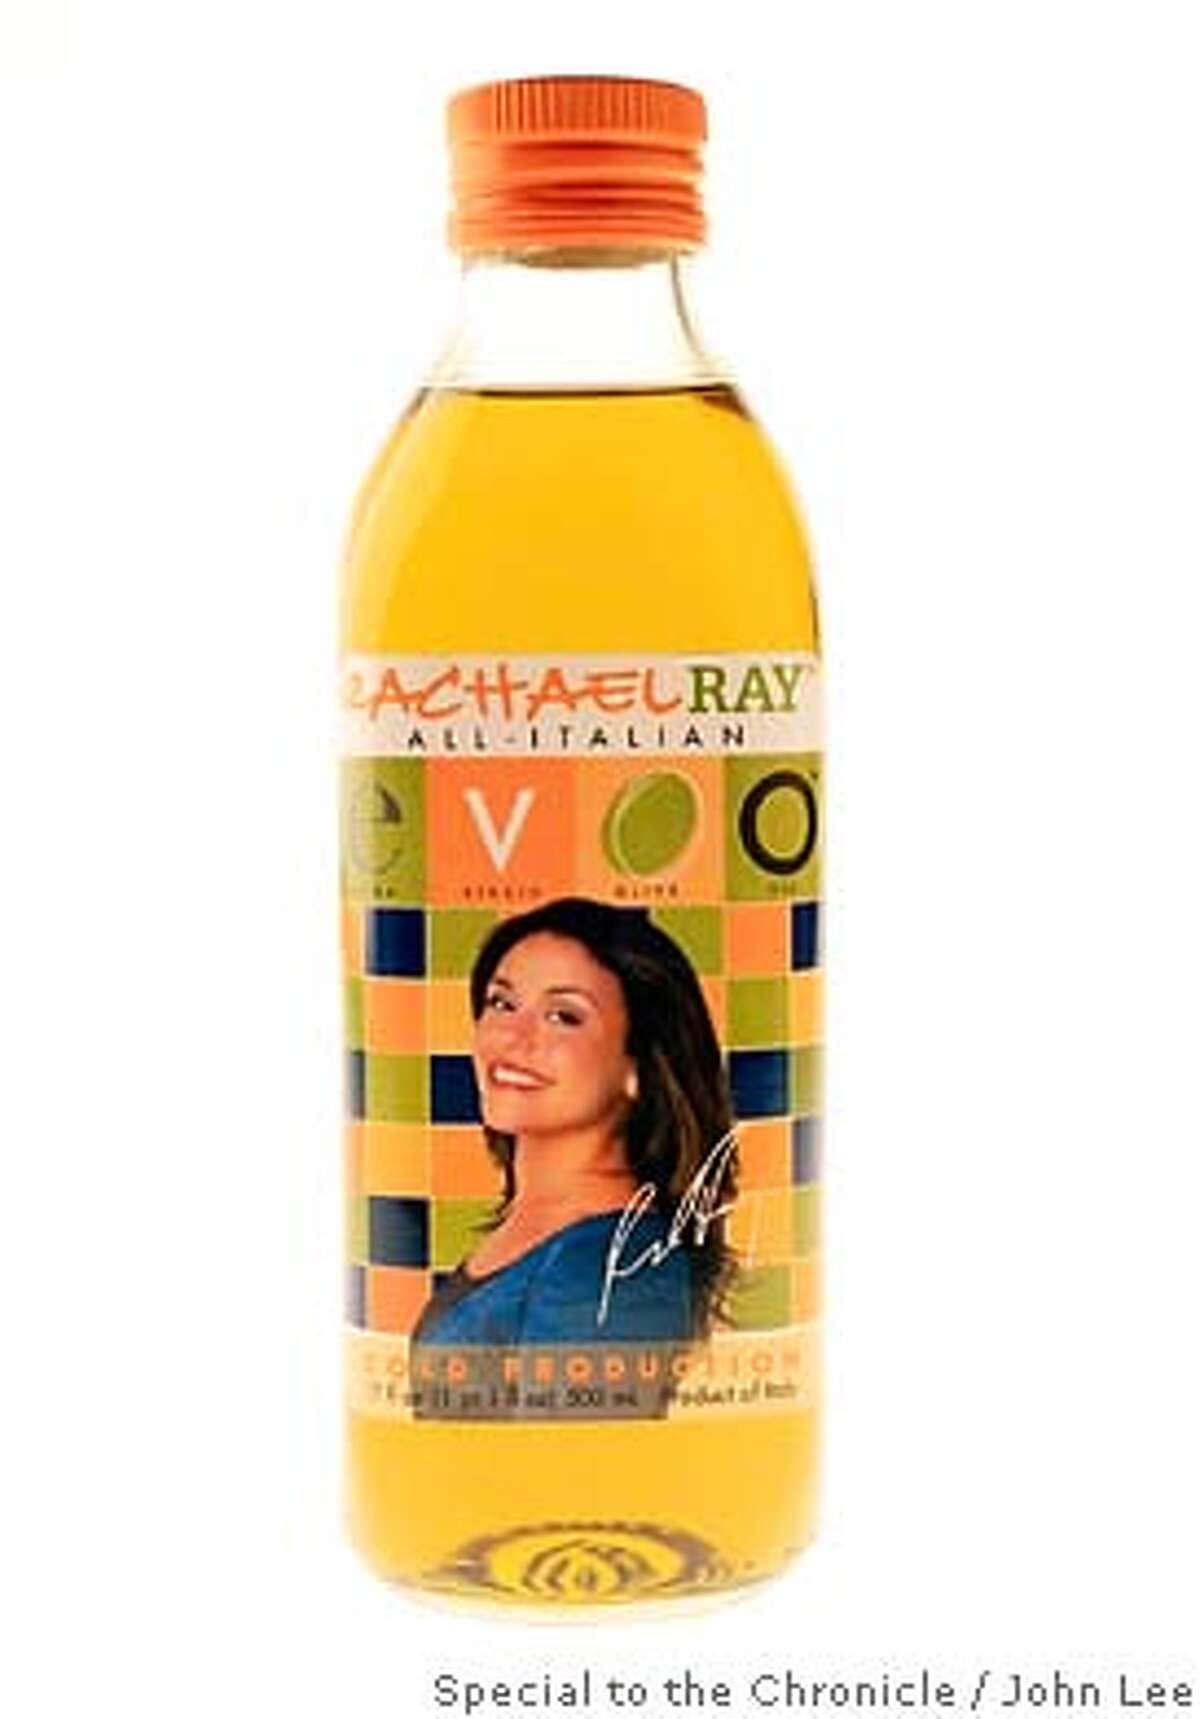 WHATS21_01JOHNLEE.JPG Rachael Ray olive oil. By JOHN LEE/SPECIAL TO THE CHRONICLE